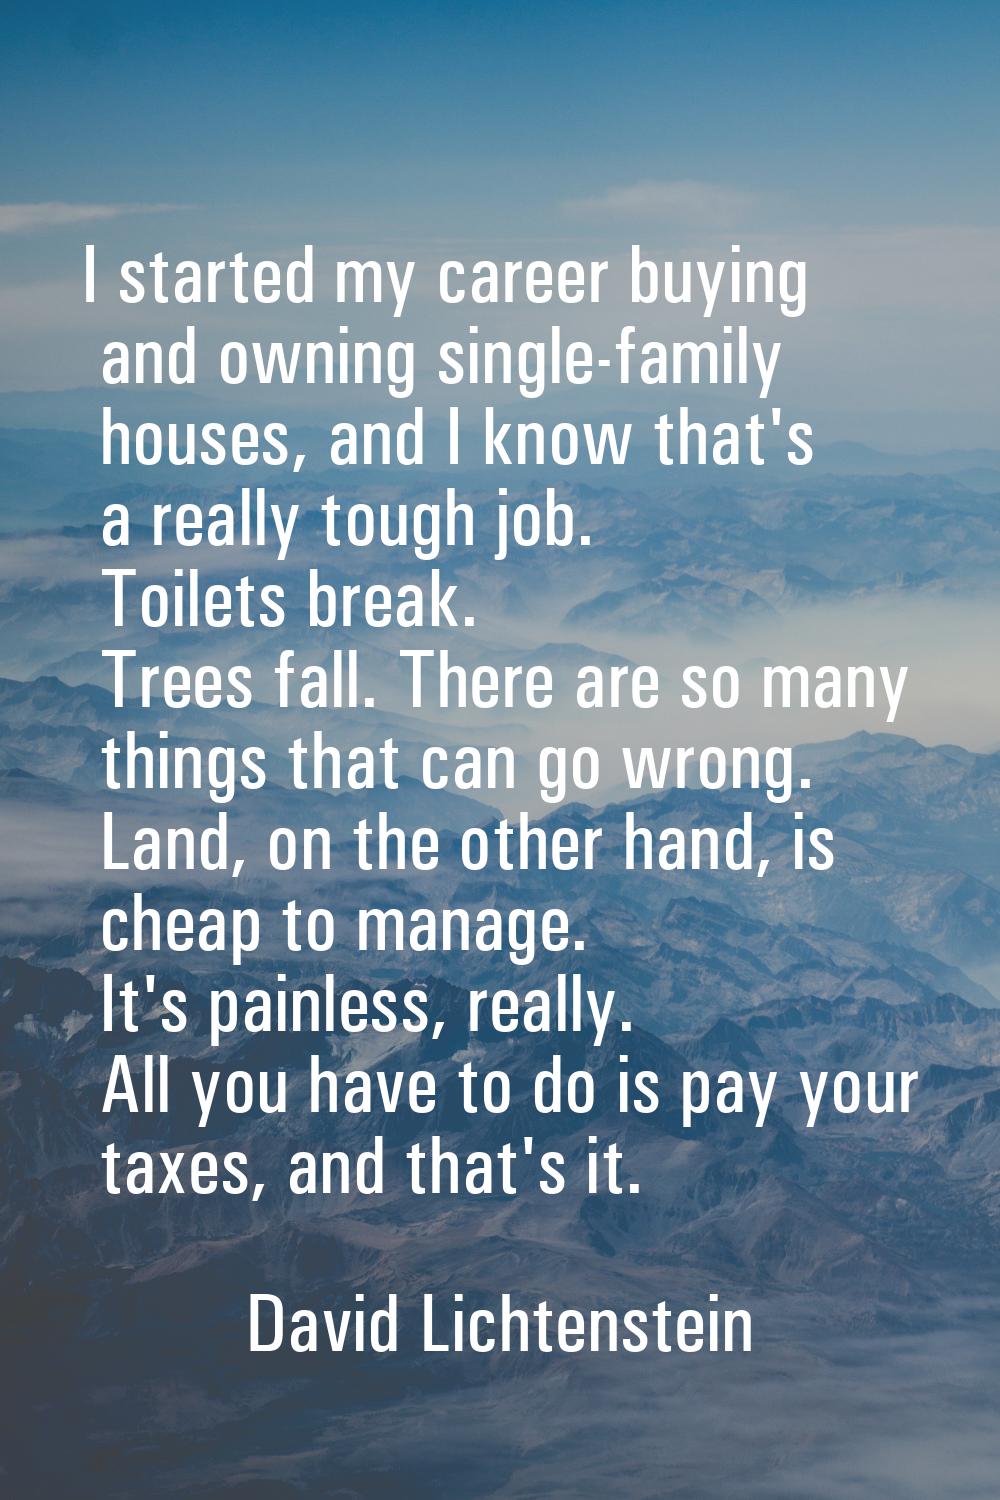 I started my career buying and owning single-family houses, and I know that's a really tough job. T